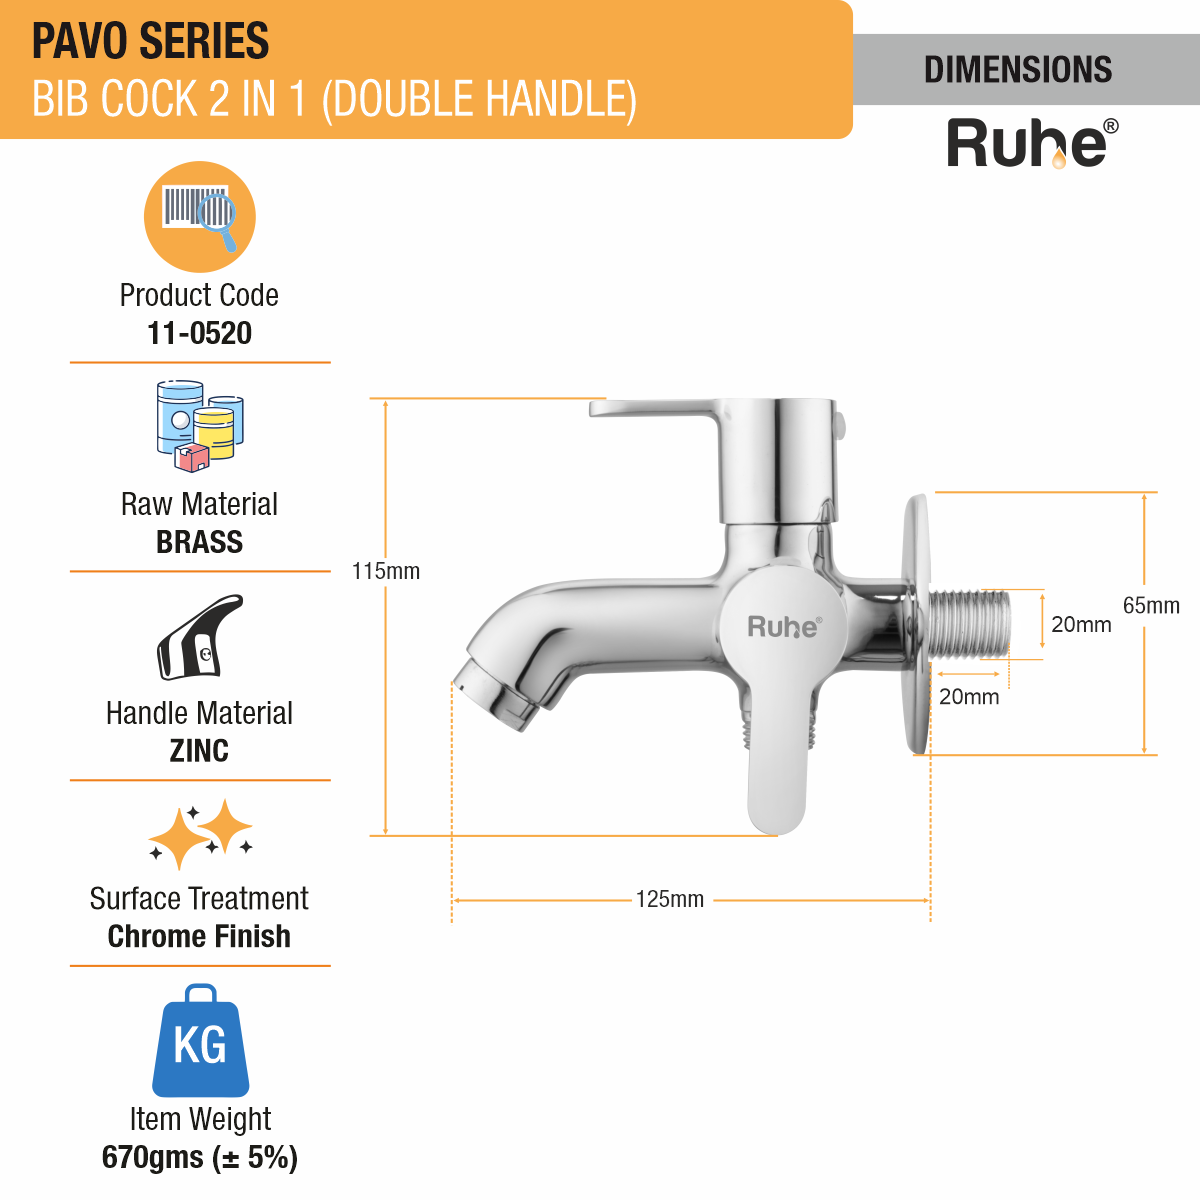 Pavo Two Way Bib Tap Brass Faucet (Double Handle) dimensions and size